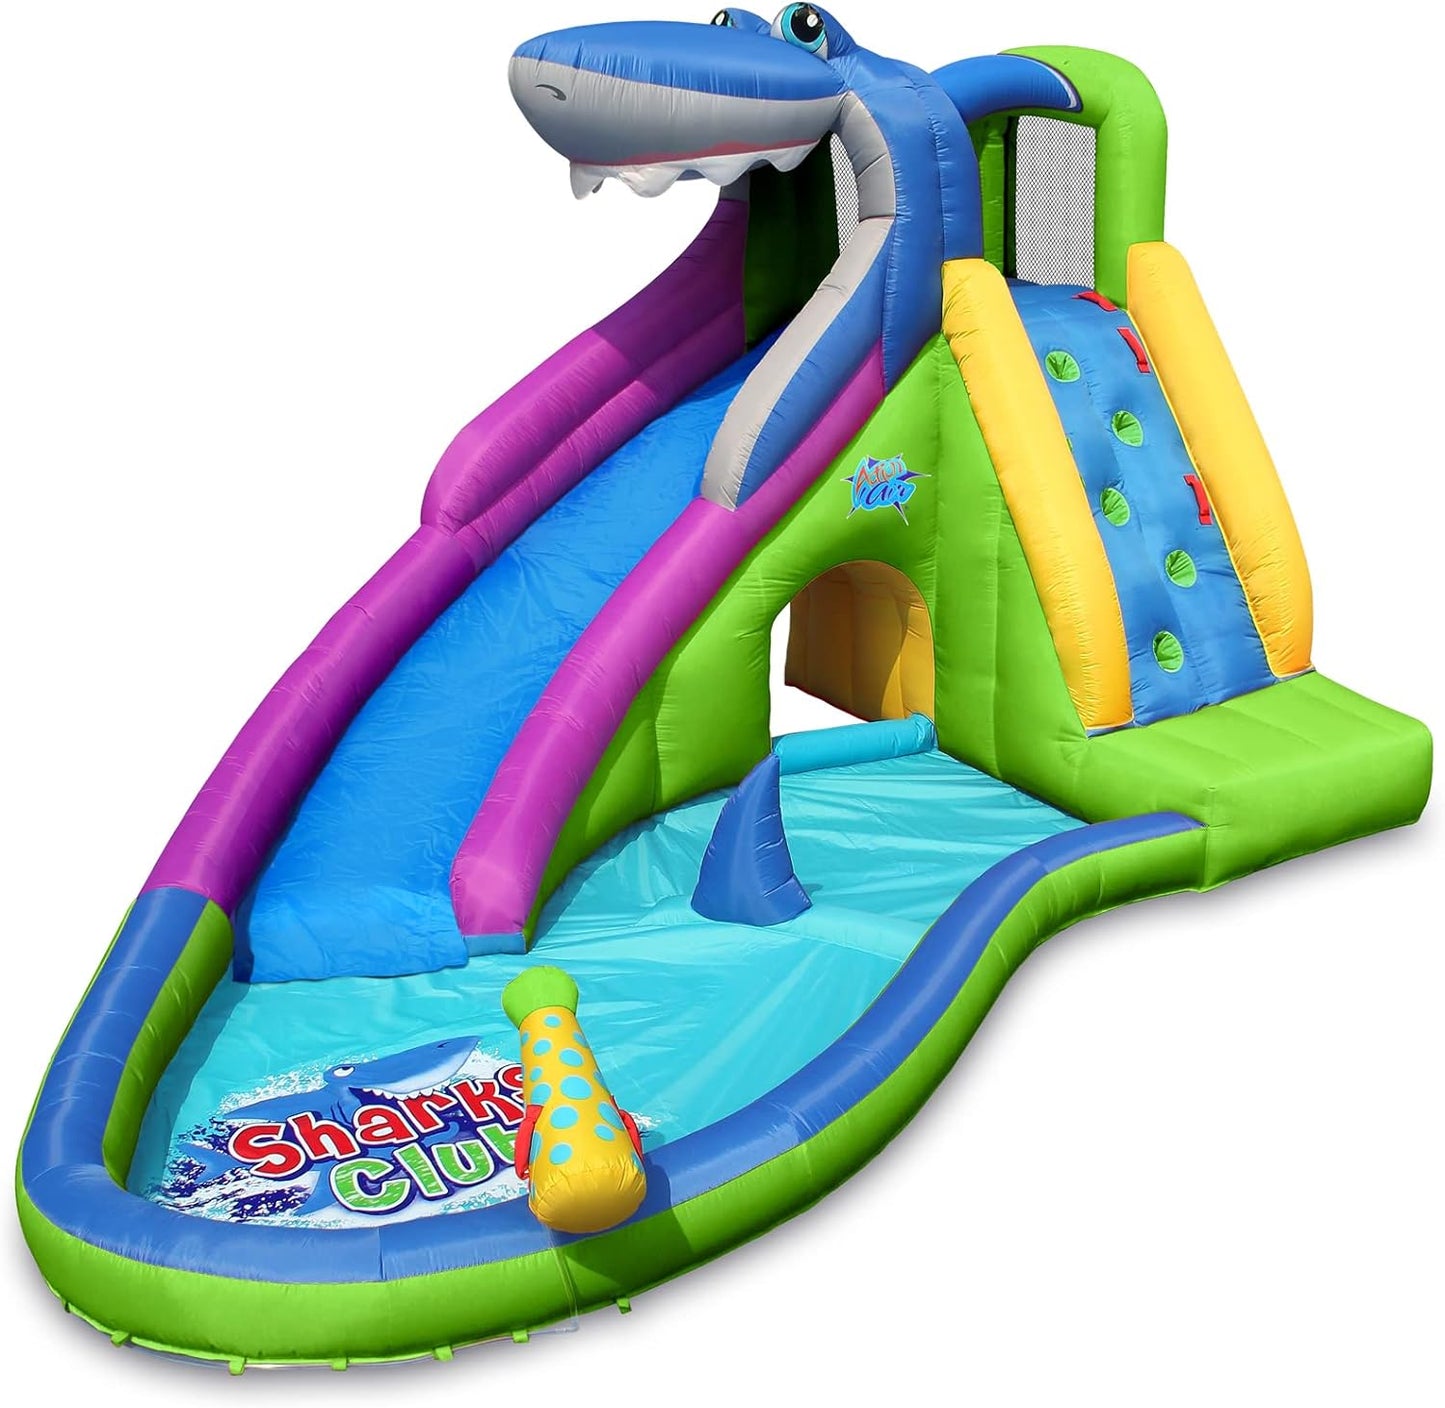 ACTION AIR Inflatable Water Slide, Shark Bounce House with Slide for Wet and Dry, Playground Sets for Kids Backyard, Water Spray & Water Pool, Durable Sewn with Extra Thick Material